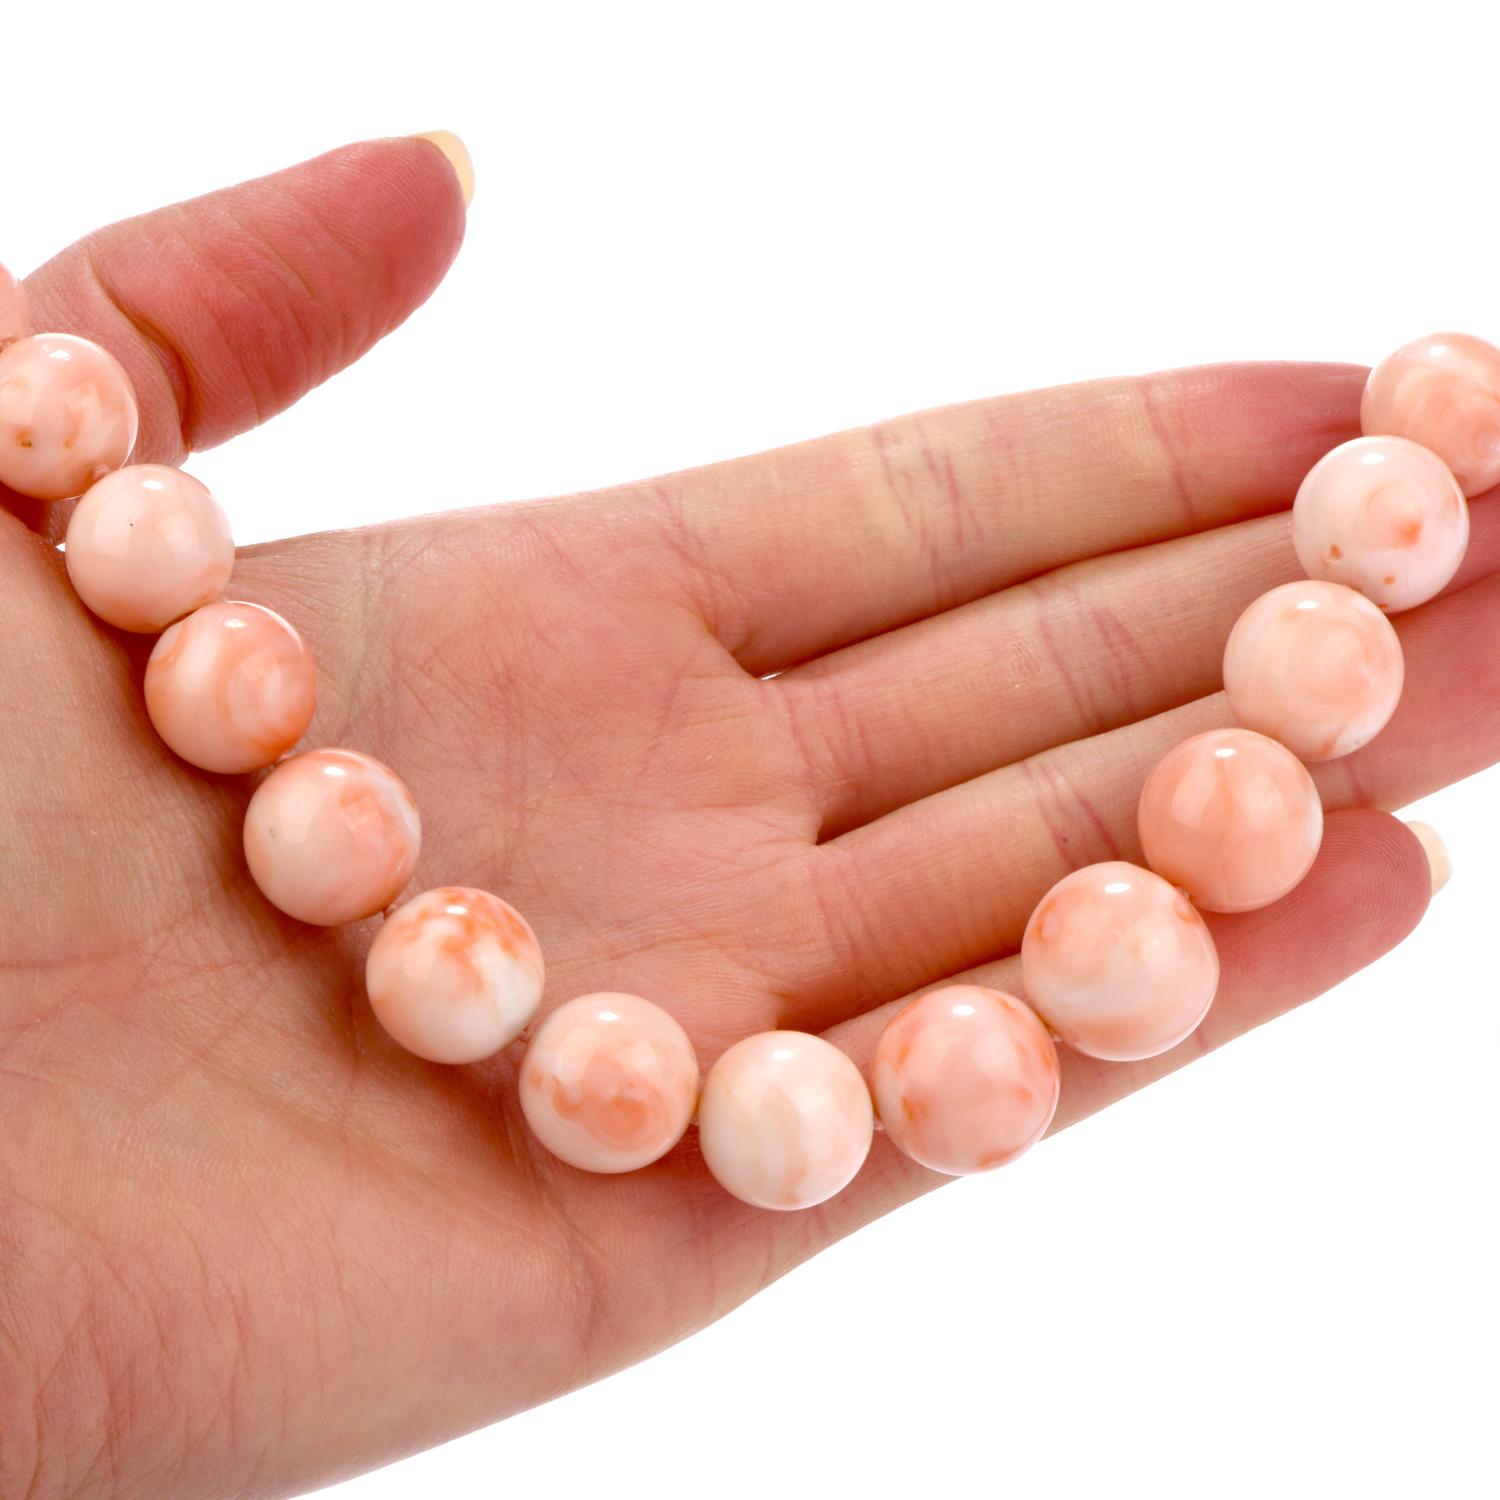 pink coral necklace